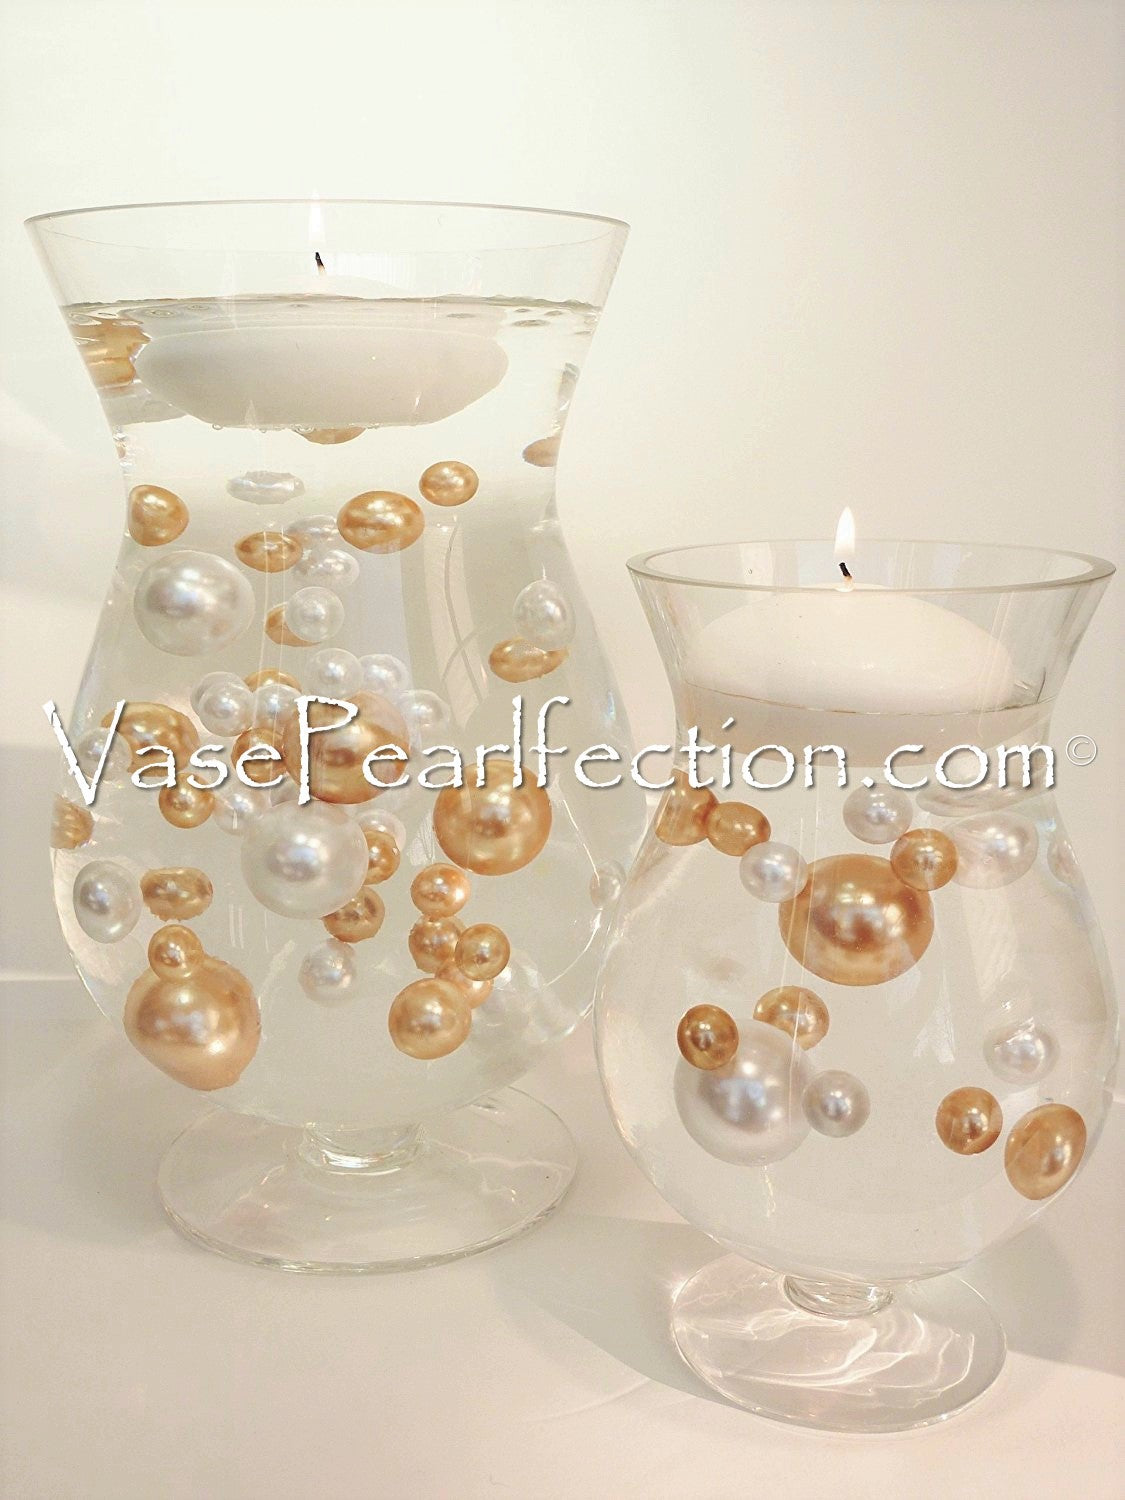 120 Gold & White Pearls with Sparking Gems for Vase Decor